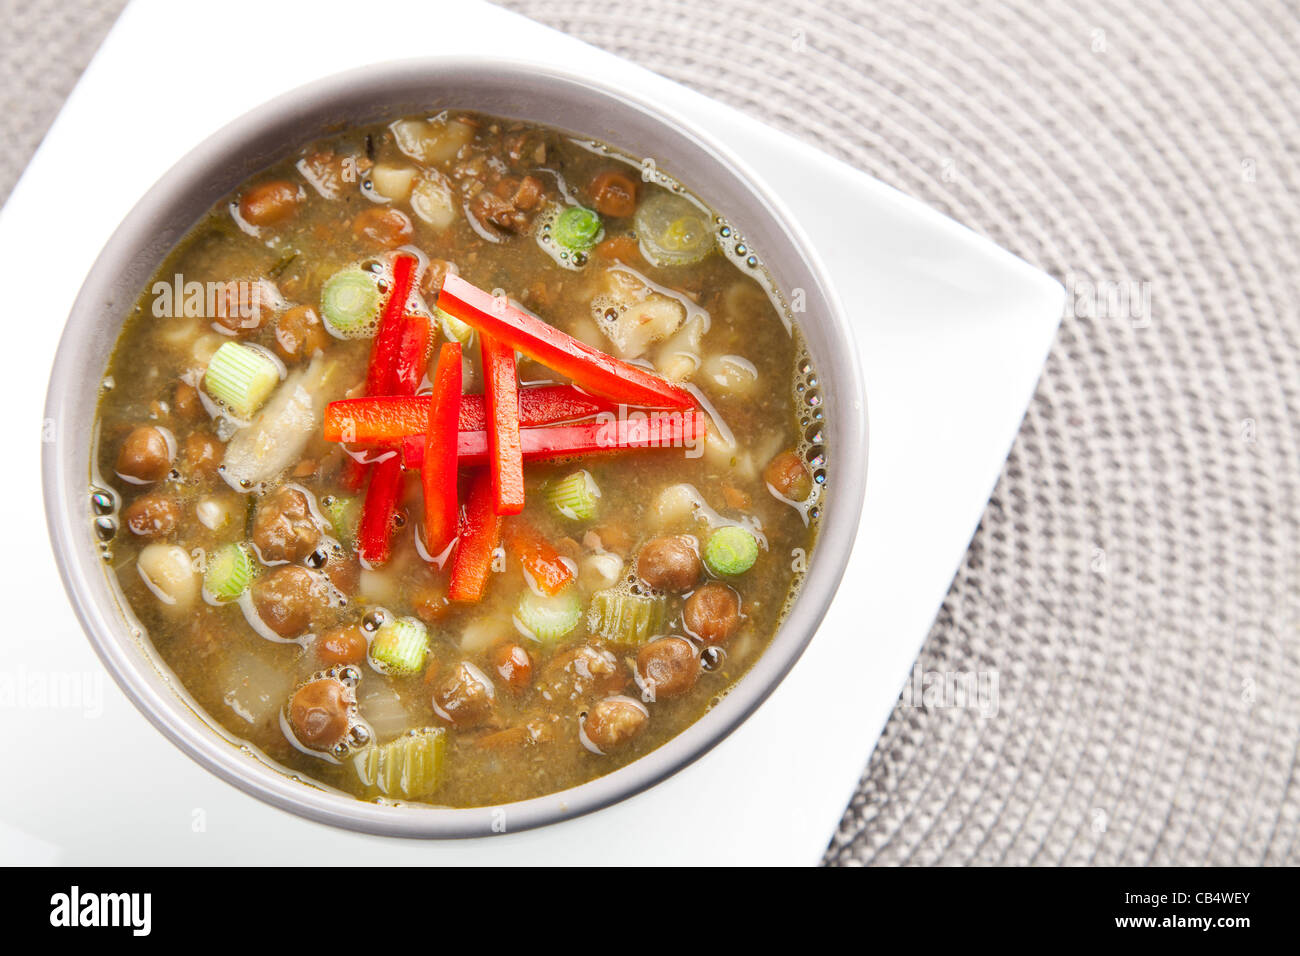 Bowl of fresh soup with kapucijners green onions and red bell pepper garnish Stock Photo